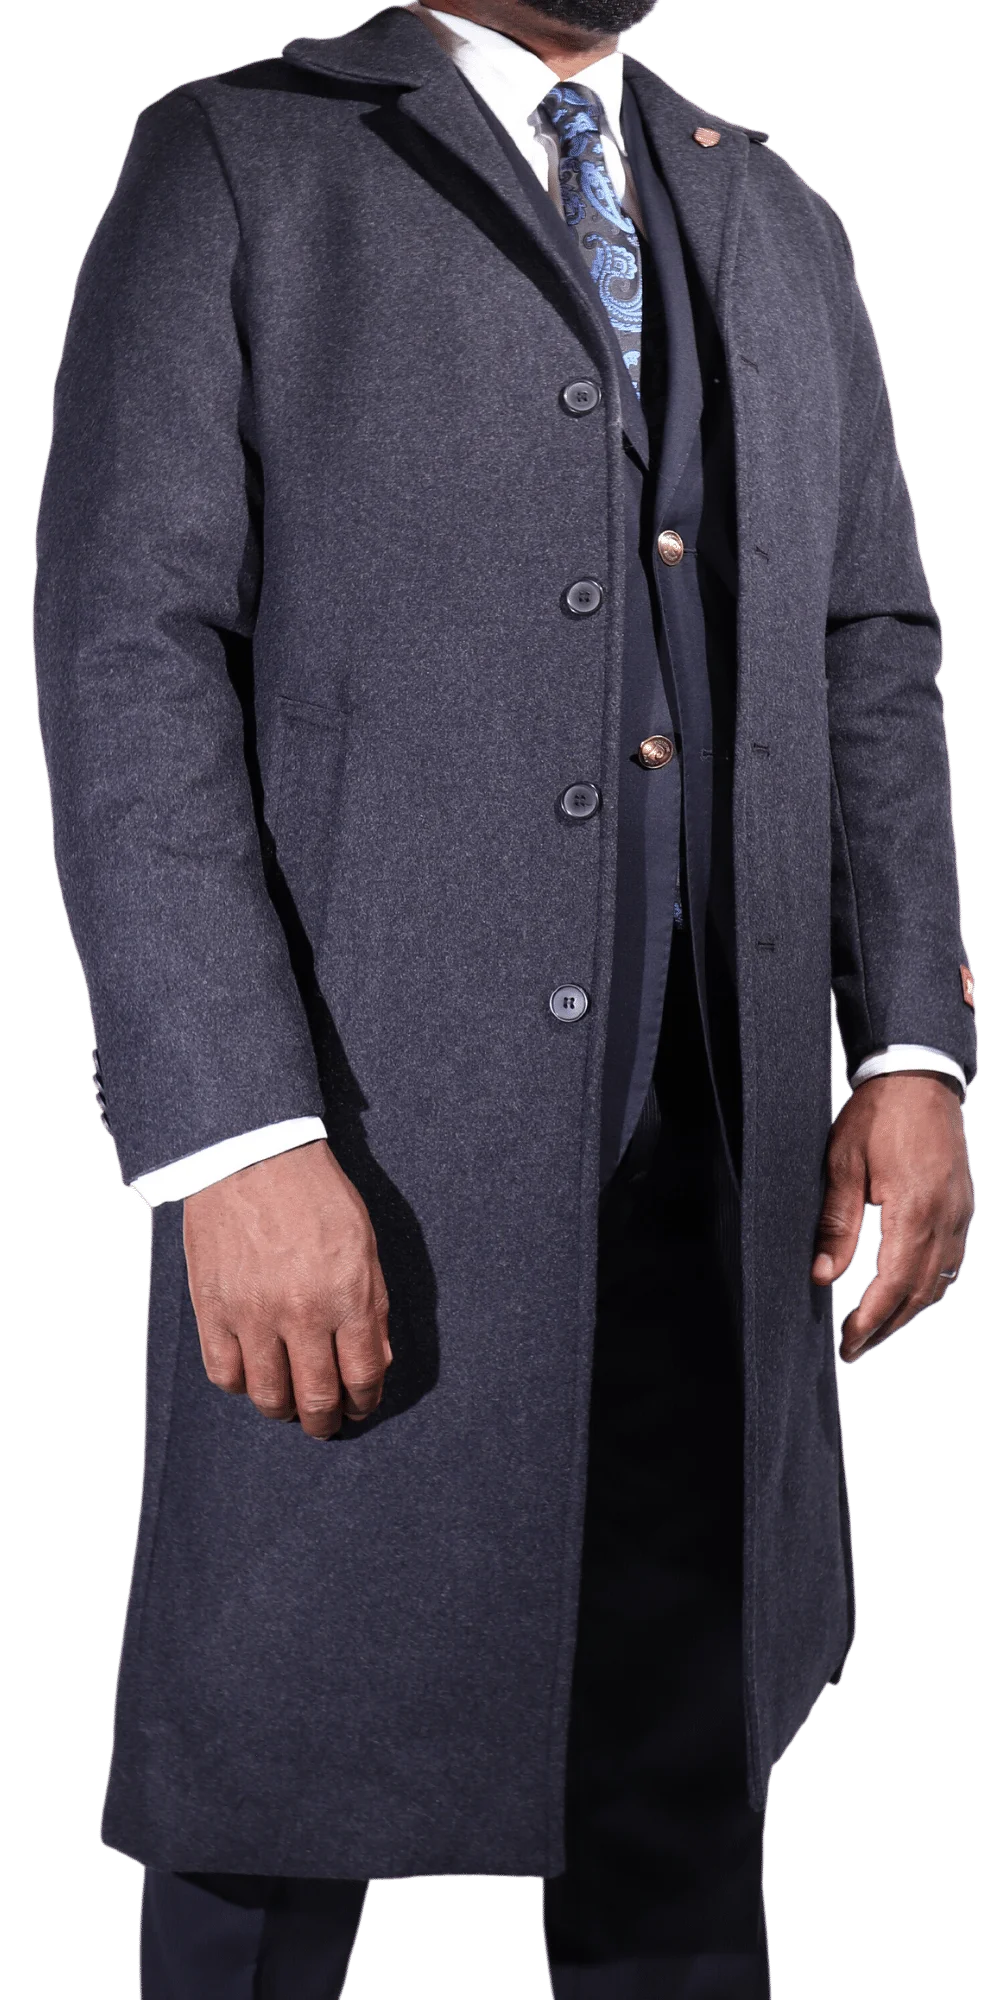 Men's Navada Clothing Cashmere Trenchcoat/overcoat in Grey (111) available in-store, 337 Monty Naicker Street, Durban CBD or online at Omar's Tailors & Outfitters online store.   A men's fashion curation for South African men - established in 1911.